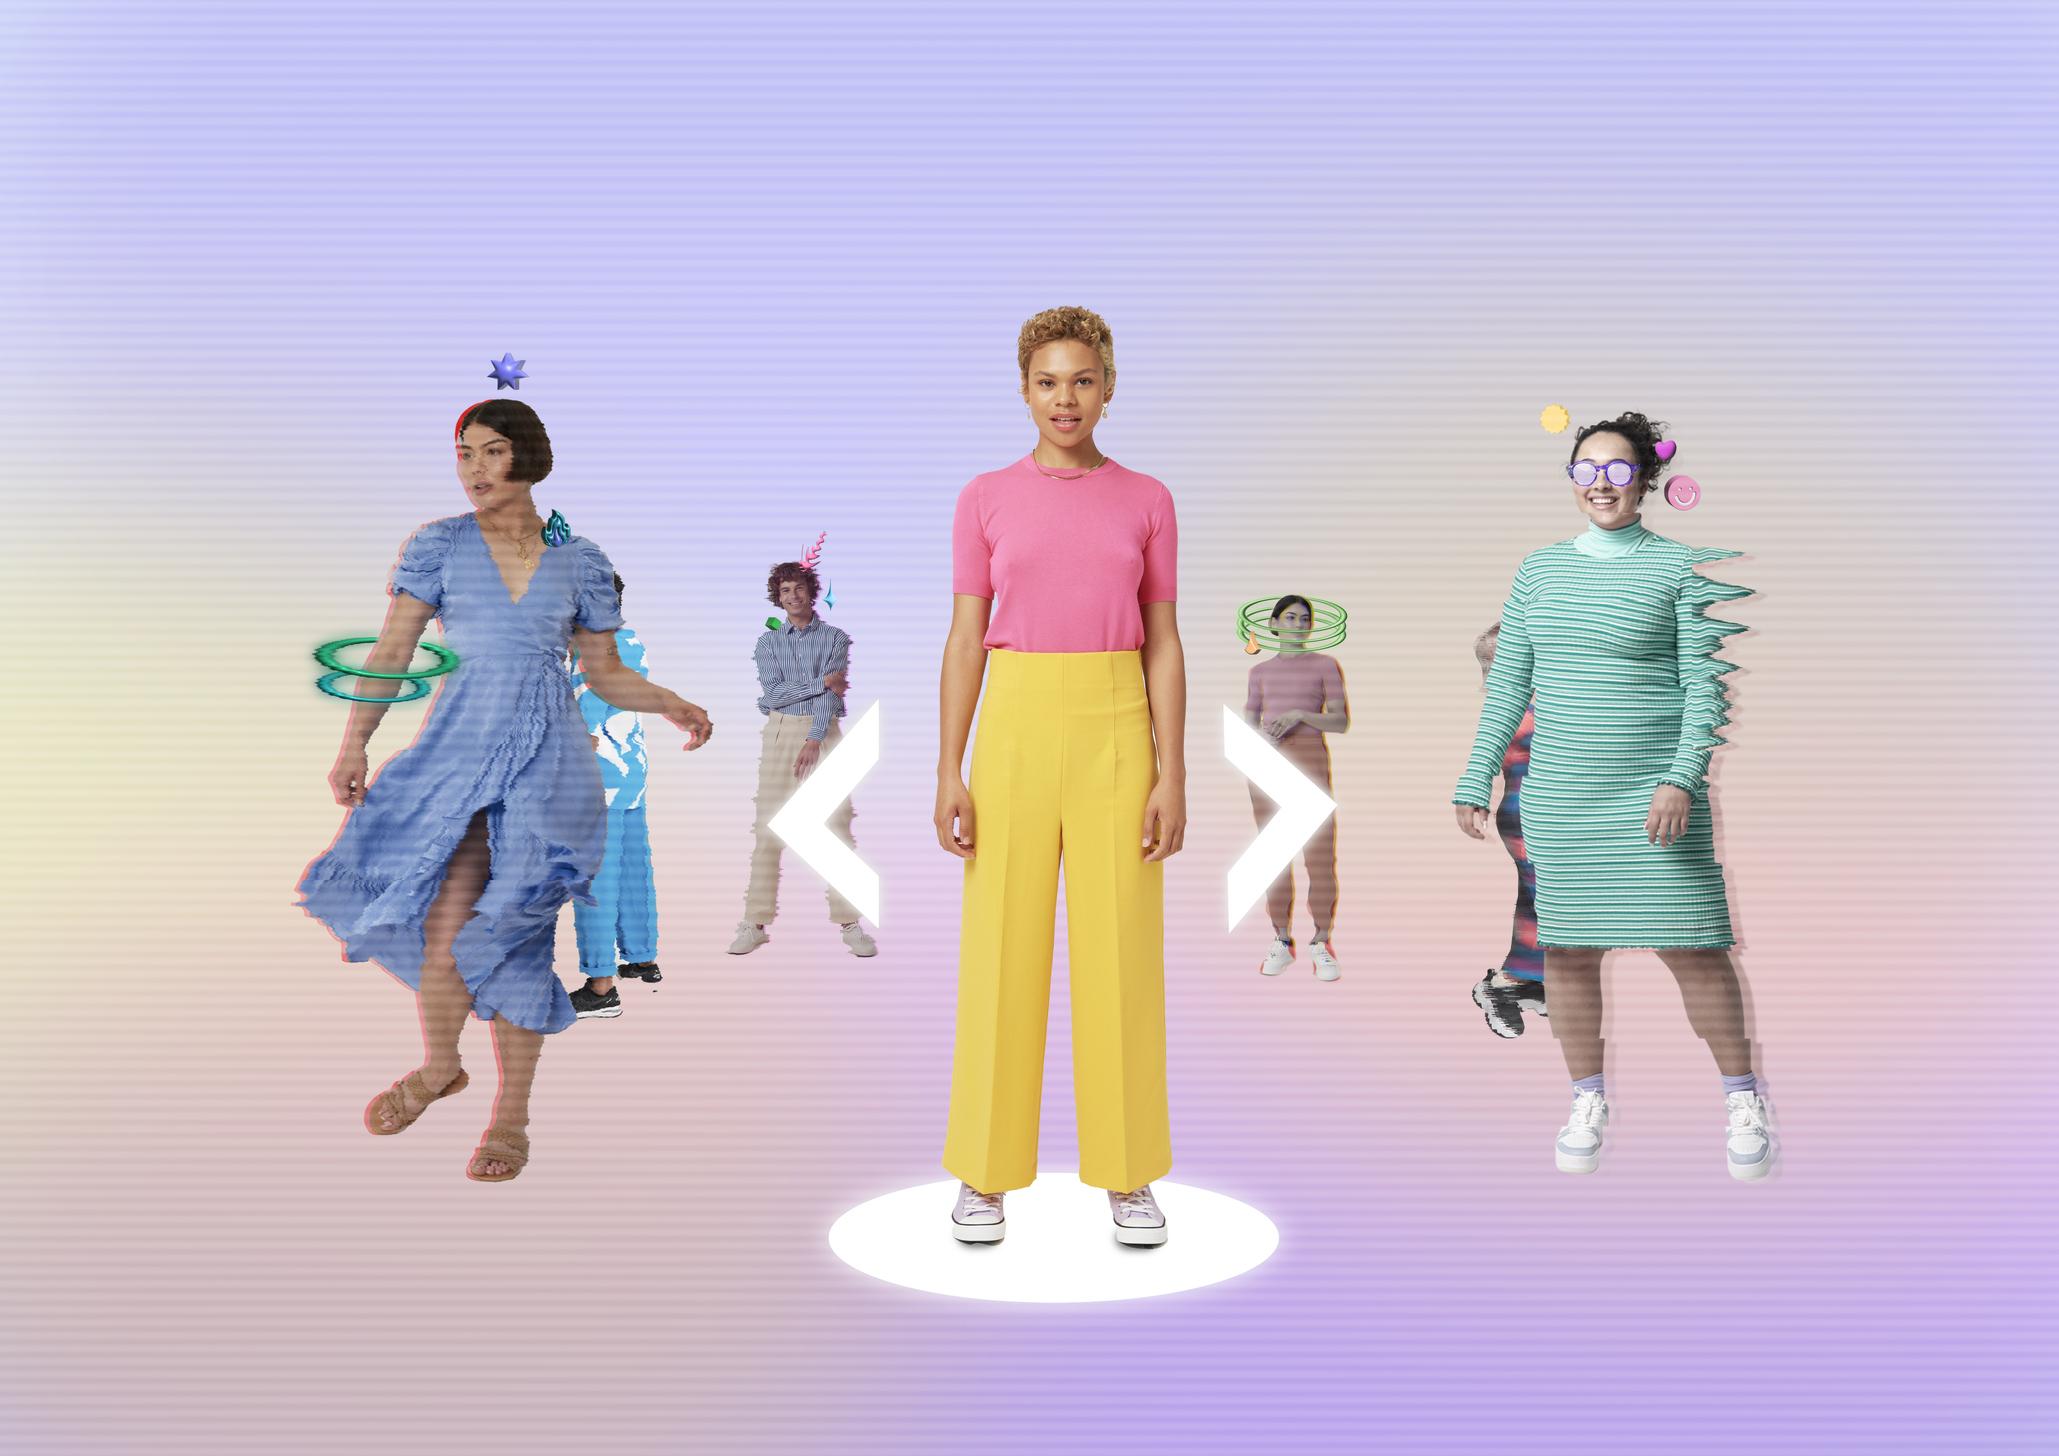  A simulation style image with several women in different outfits with arrows side by side for selection.  